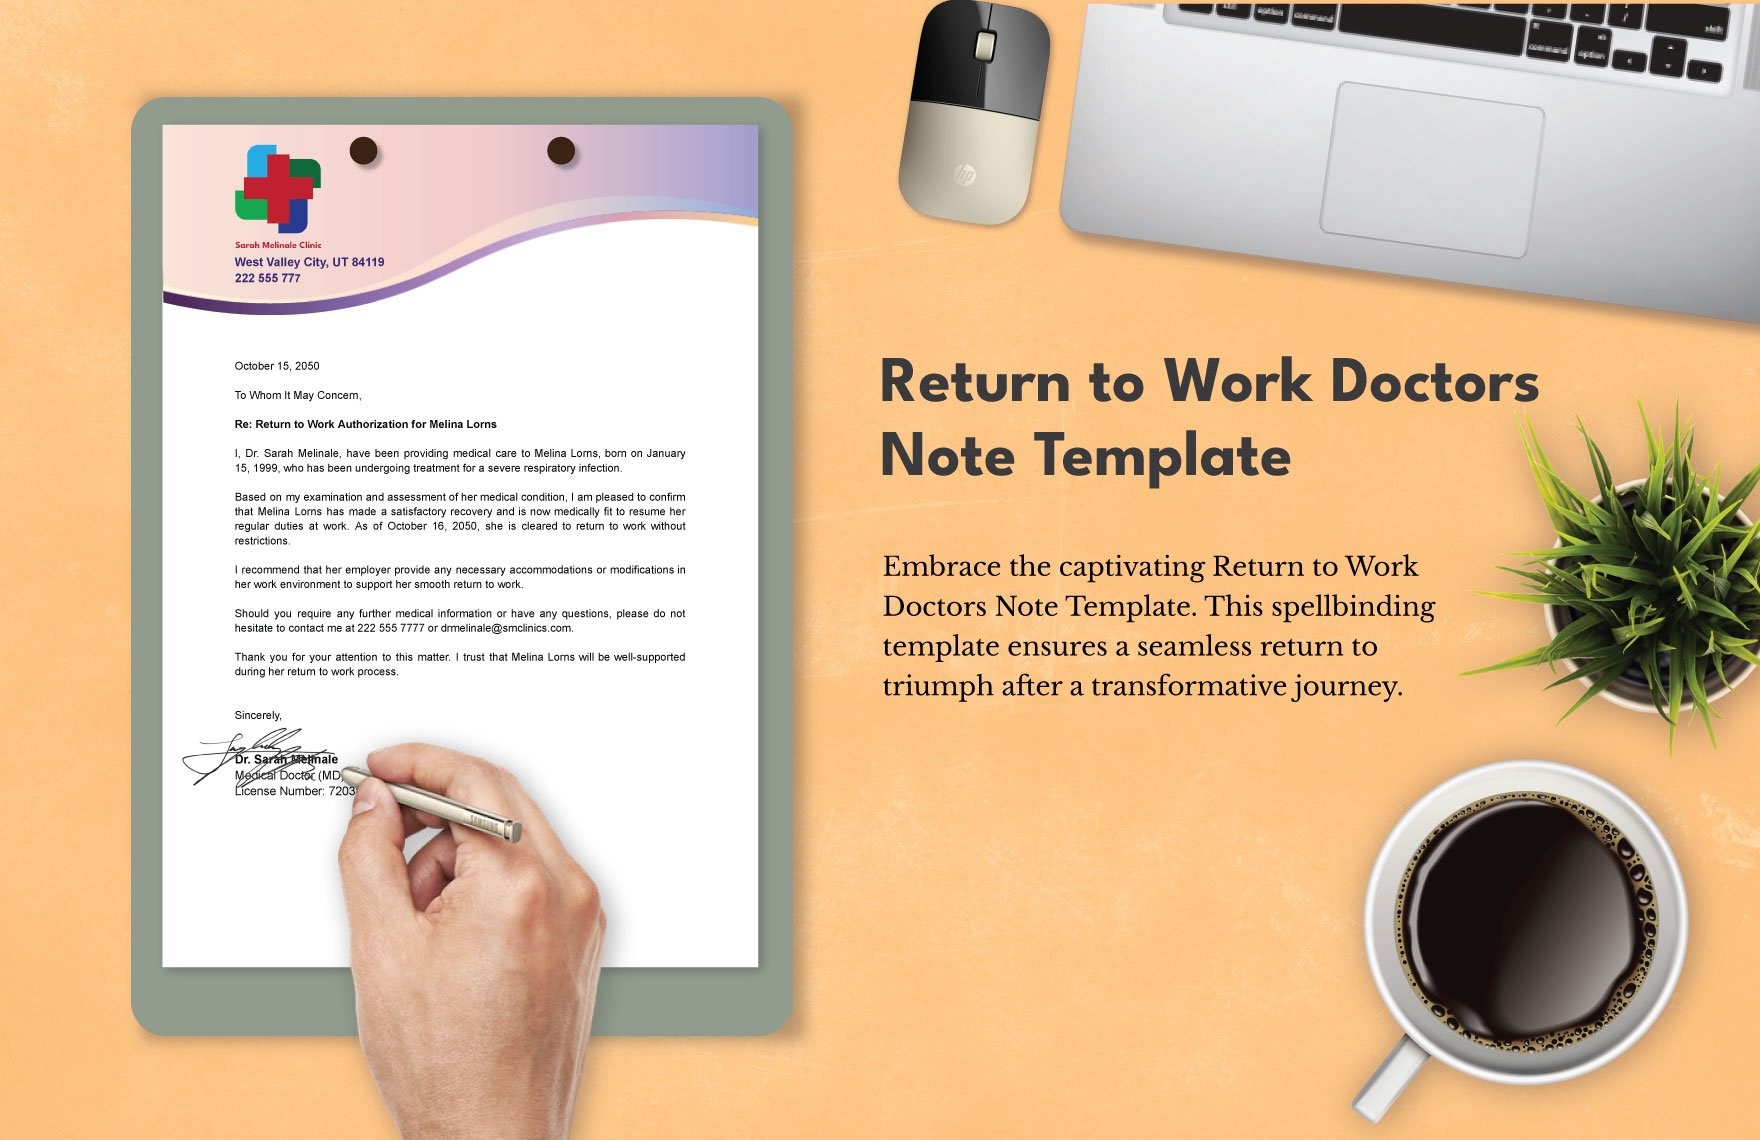 Return to Work Doctors Note Template